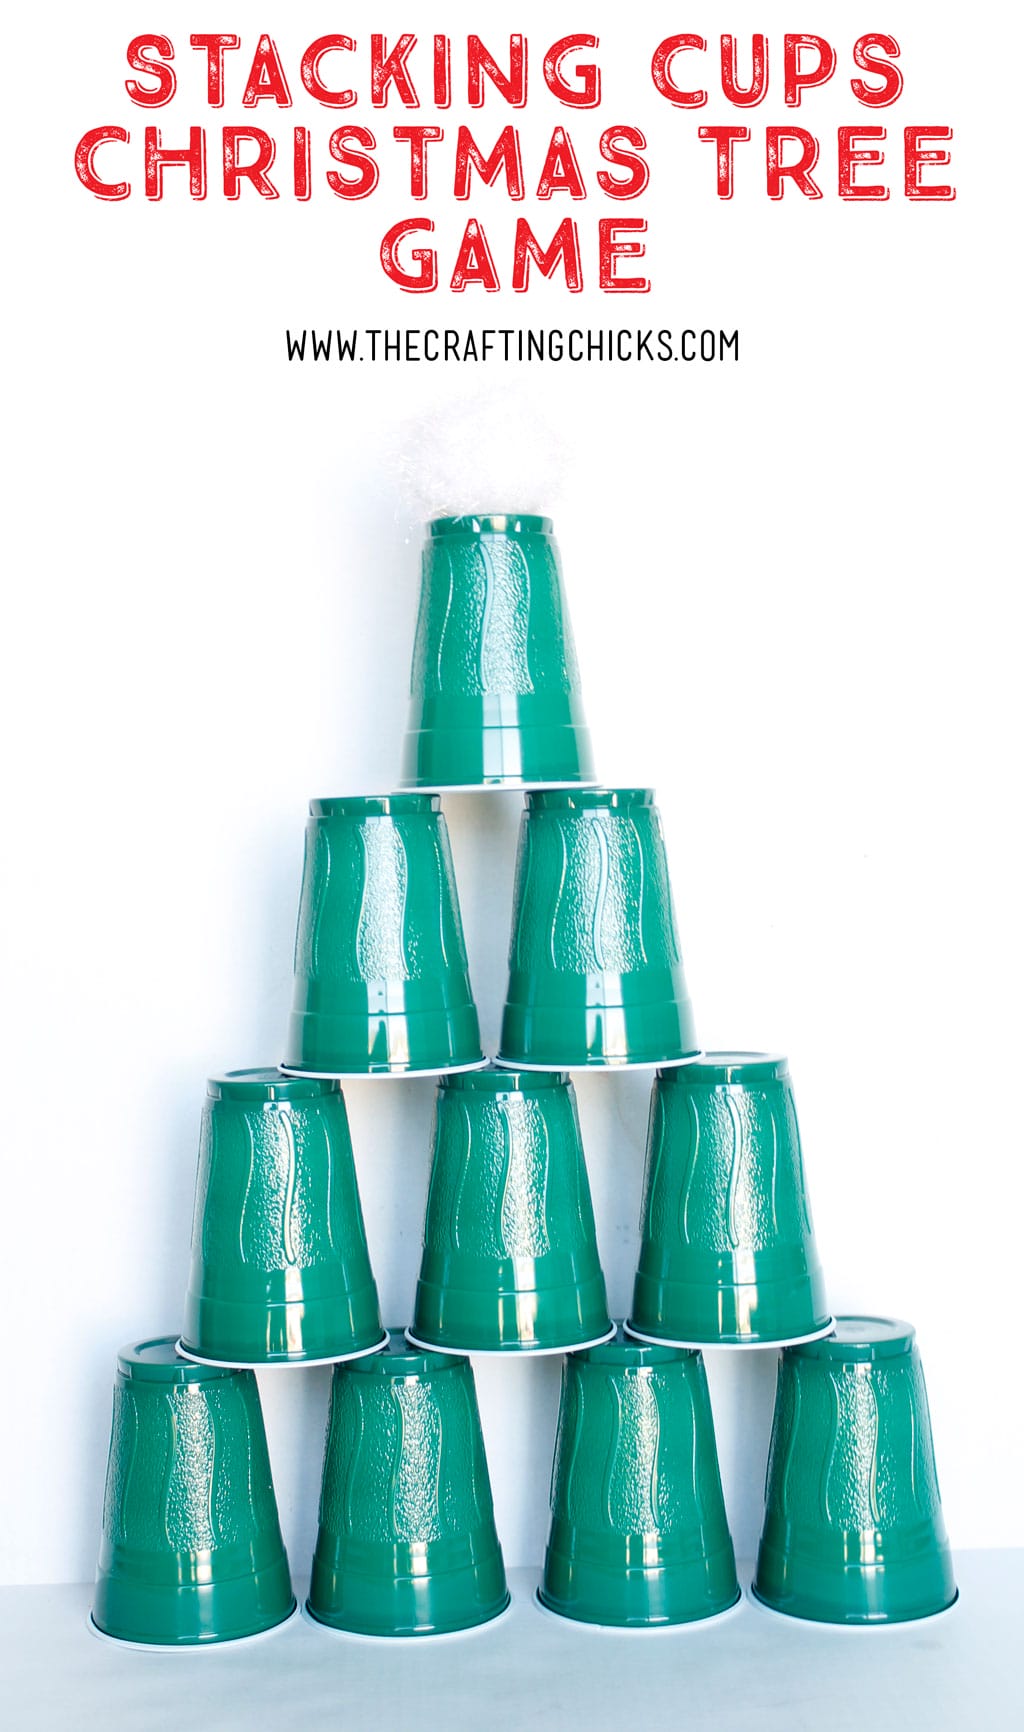 Stacking Cups Christmas Tree Game